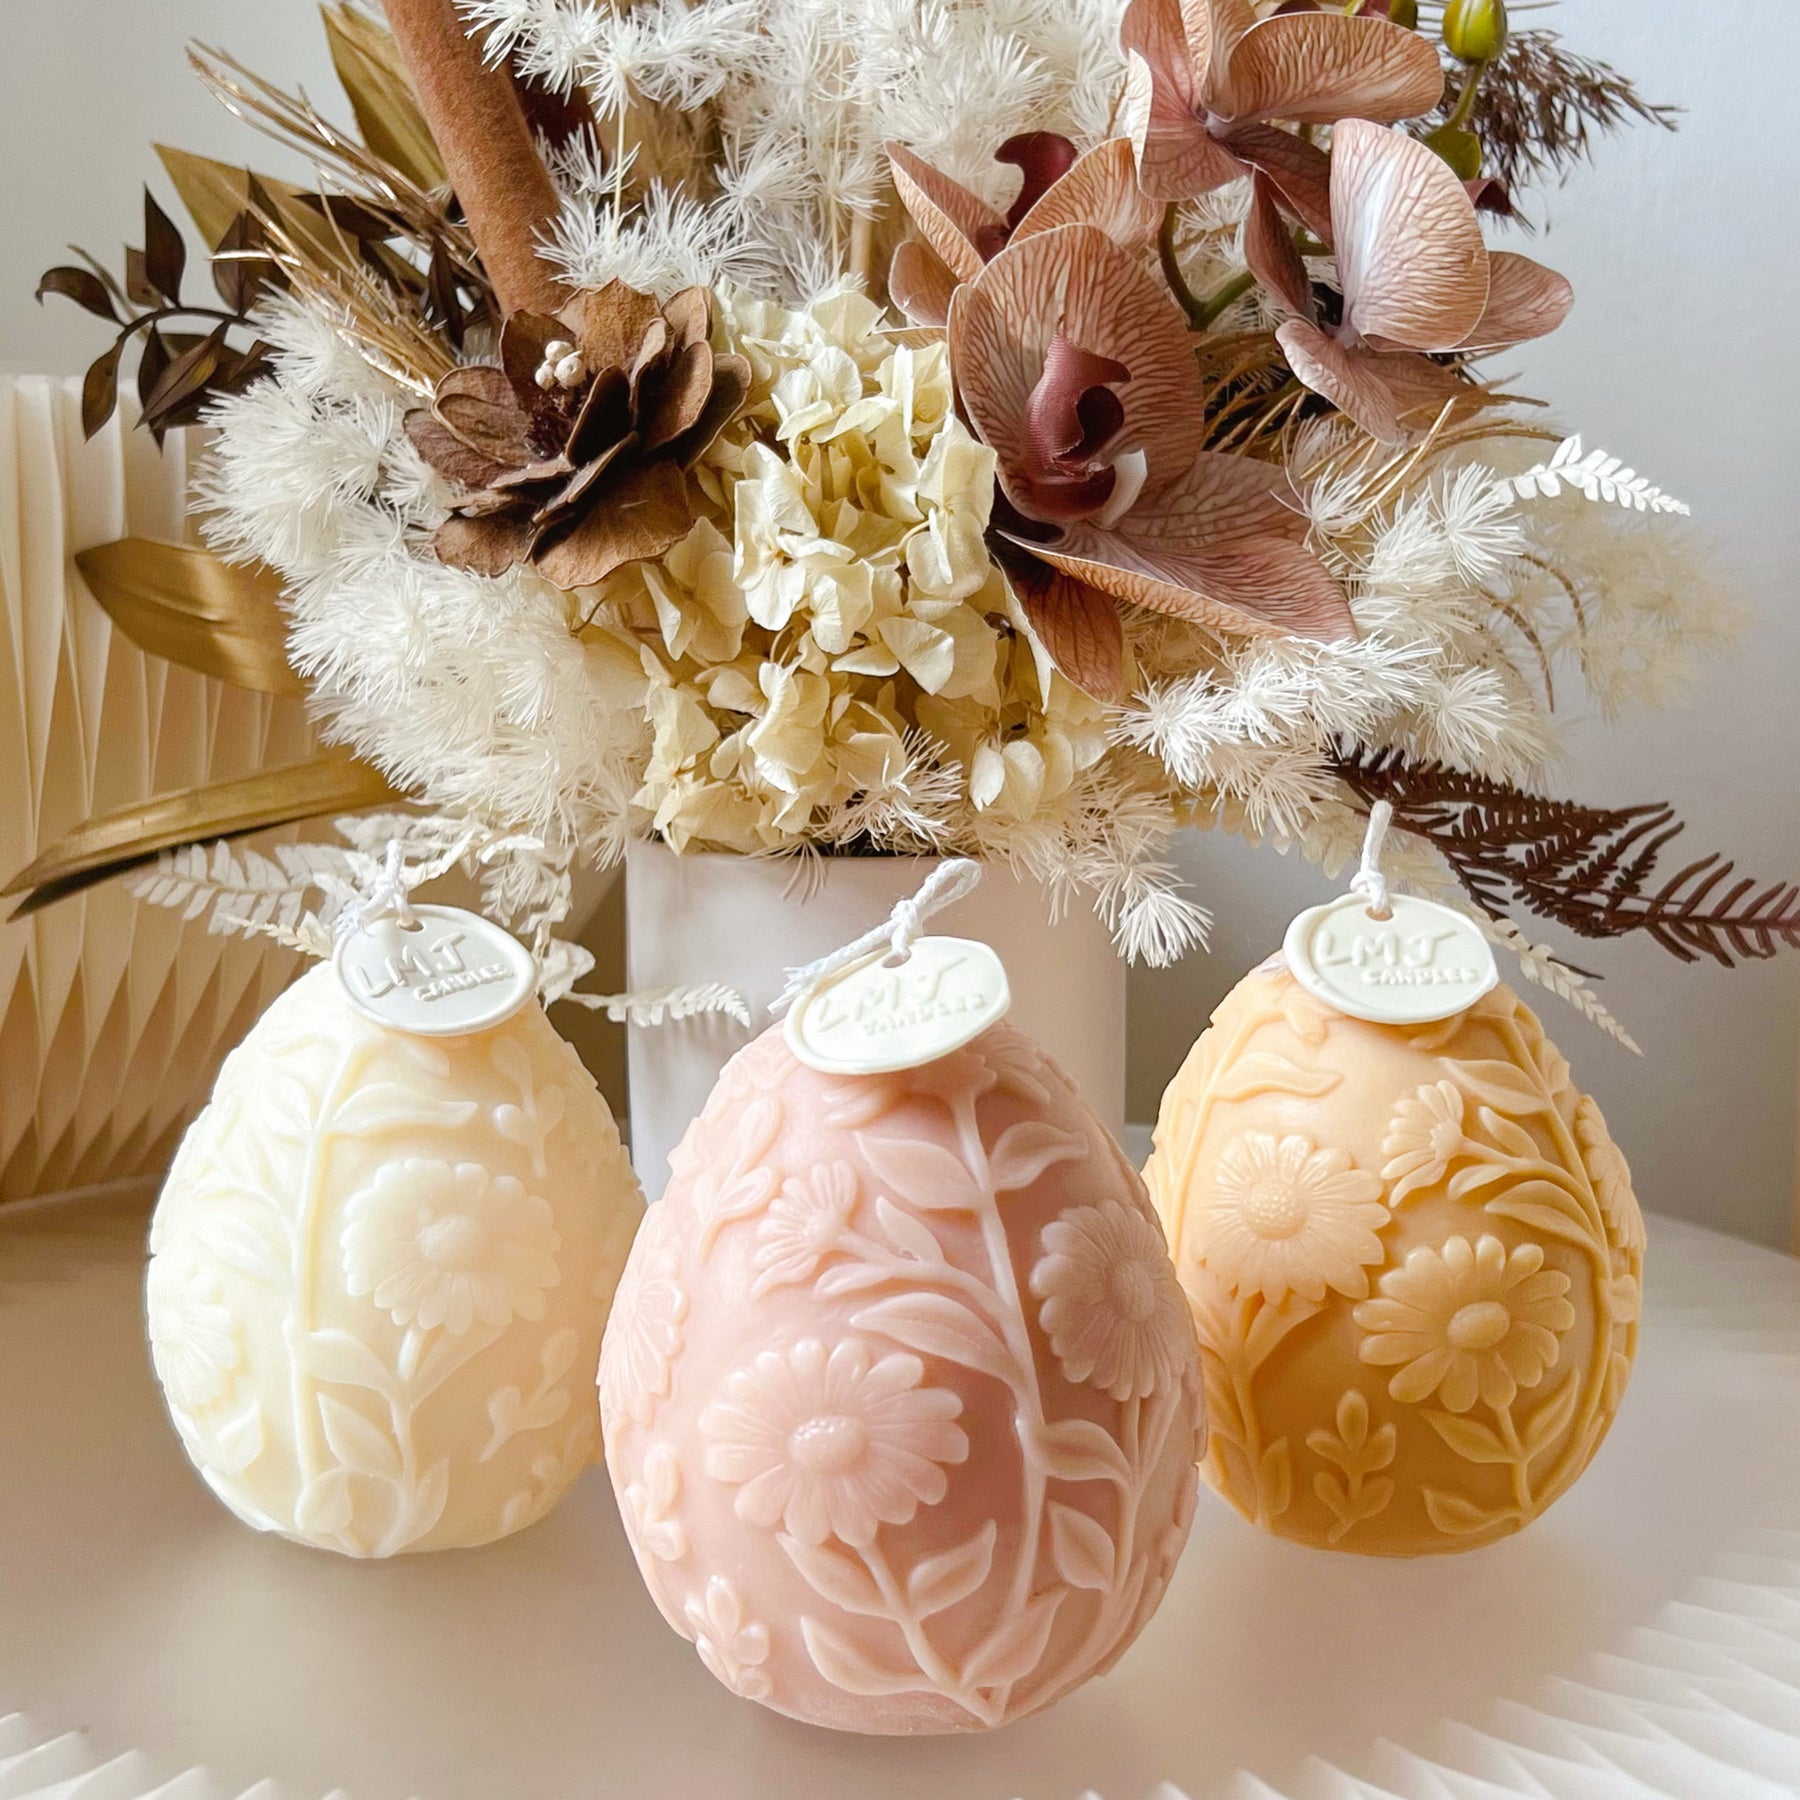 Carved Daisy Egg Scented Soy Candle - Easter Gift & Décor LMJ Candles